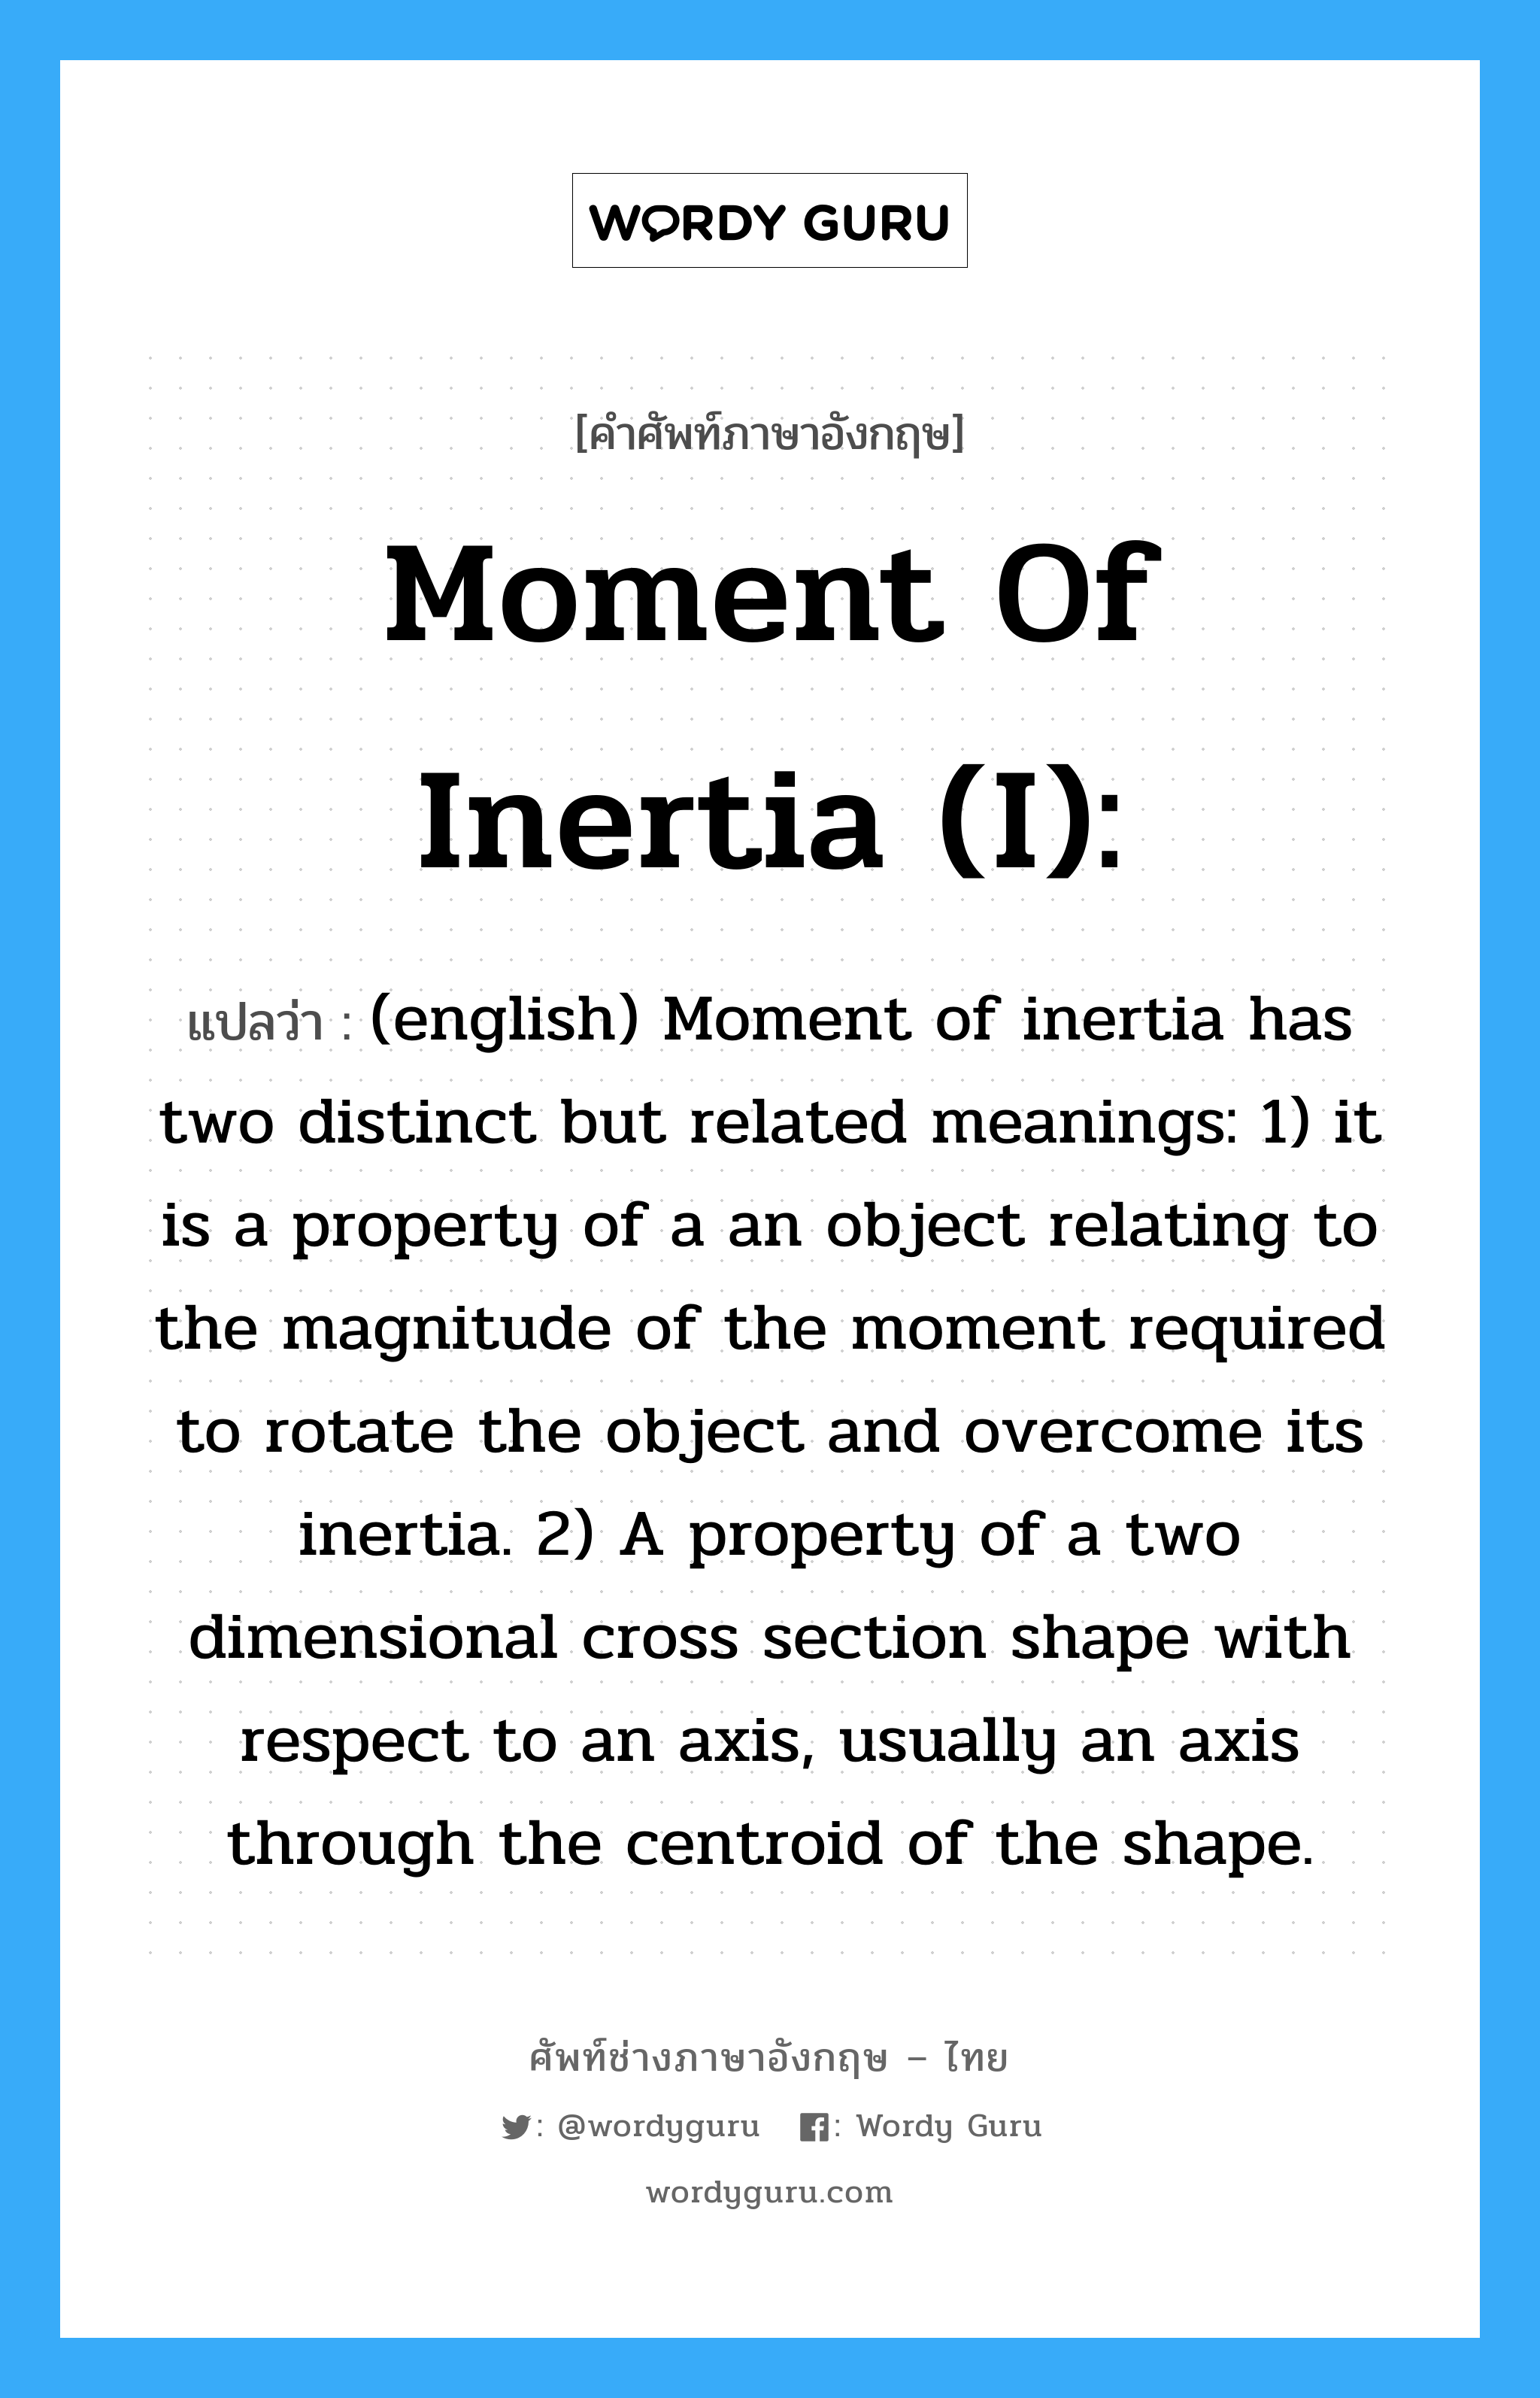 Moment of inertia (I): แปลว่า?, คำศัพท์ช่างภาษาอังกฤษ - ไทย Moment of inertia (I): คำศัพท์ภาษาอังกฤษ Moment of inertia (I): แปลว่า (english) Moment of inertia has two distinct but related meanings: 1) it is a property of a an object relating to the magnitude of the moment required to rotate the object and overcome its inertia. 2) A property of a two dimensional cross section shape with respect to an axis, usually an axis through the centroid of the shape.